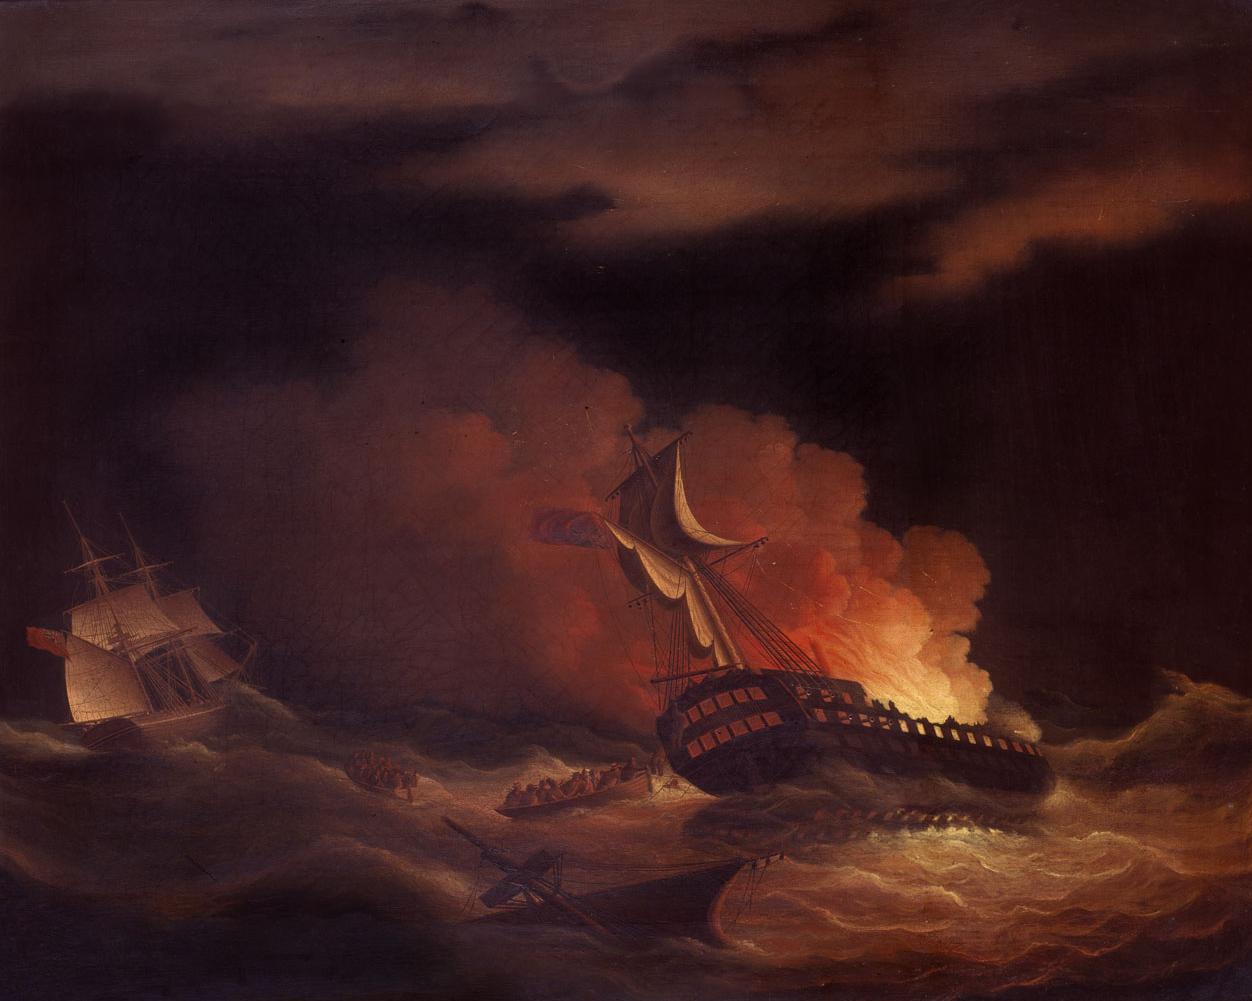 A painting showing a burning ship on a tumultuous sea